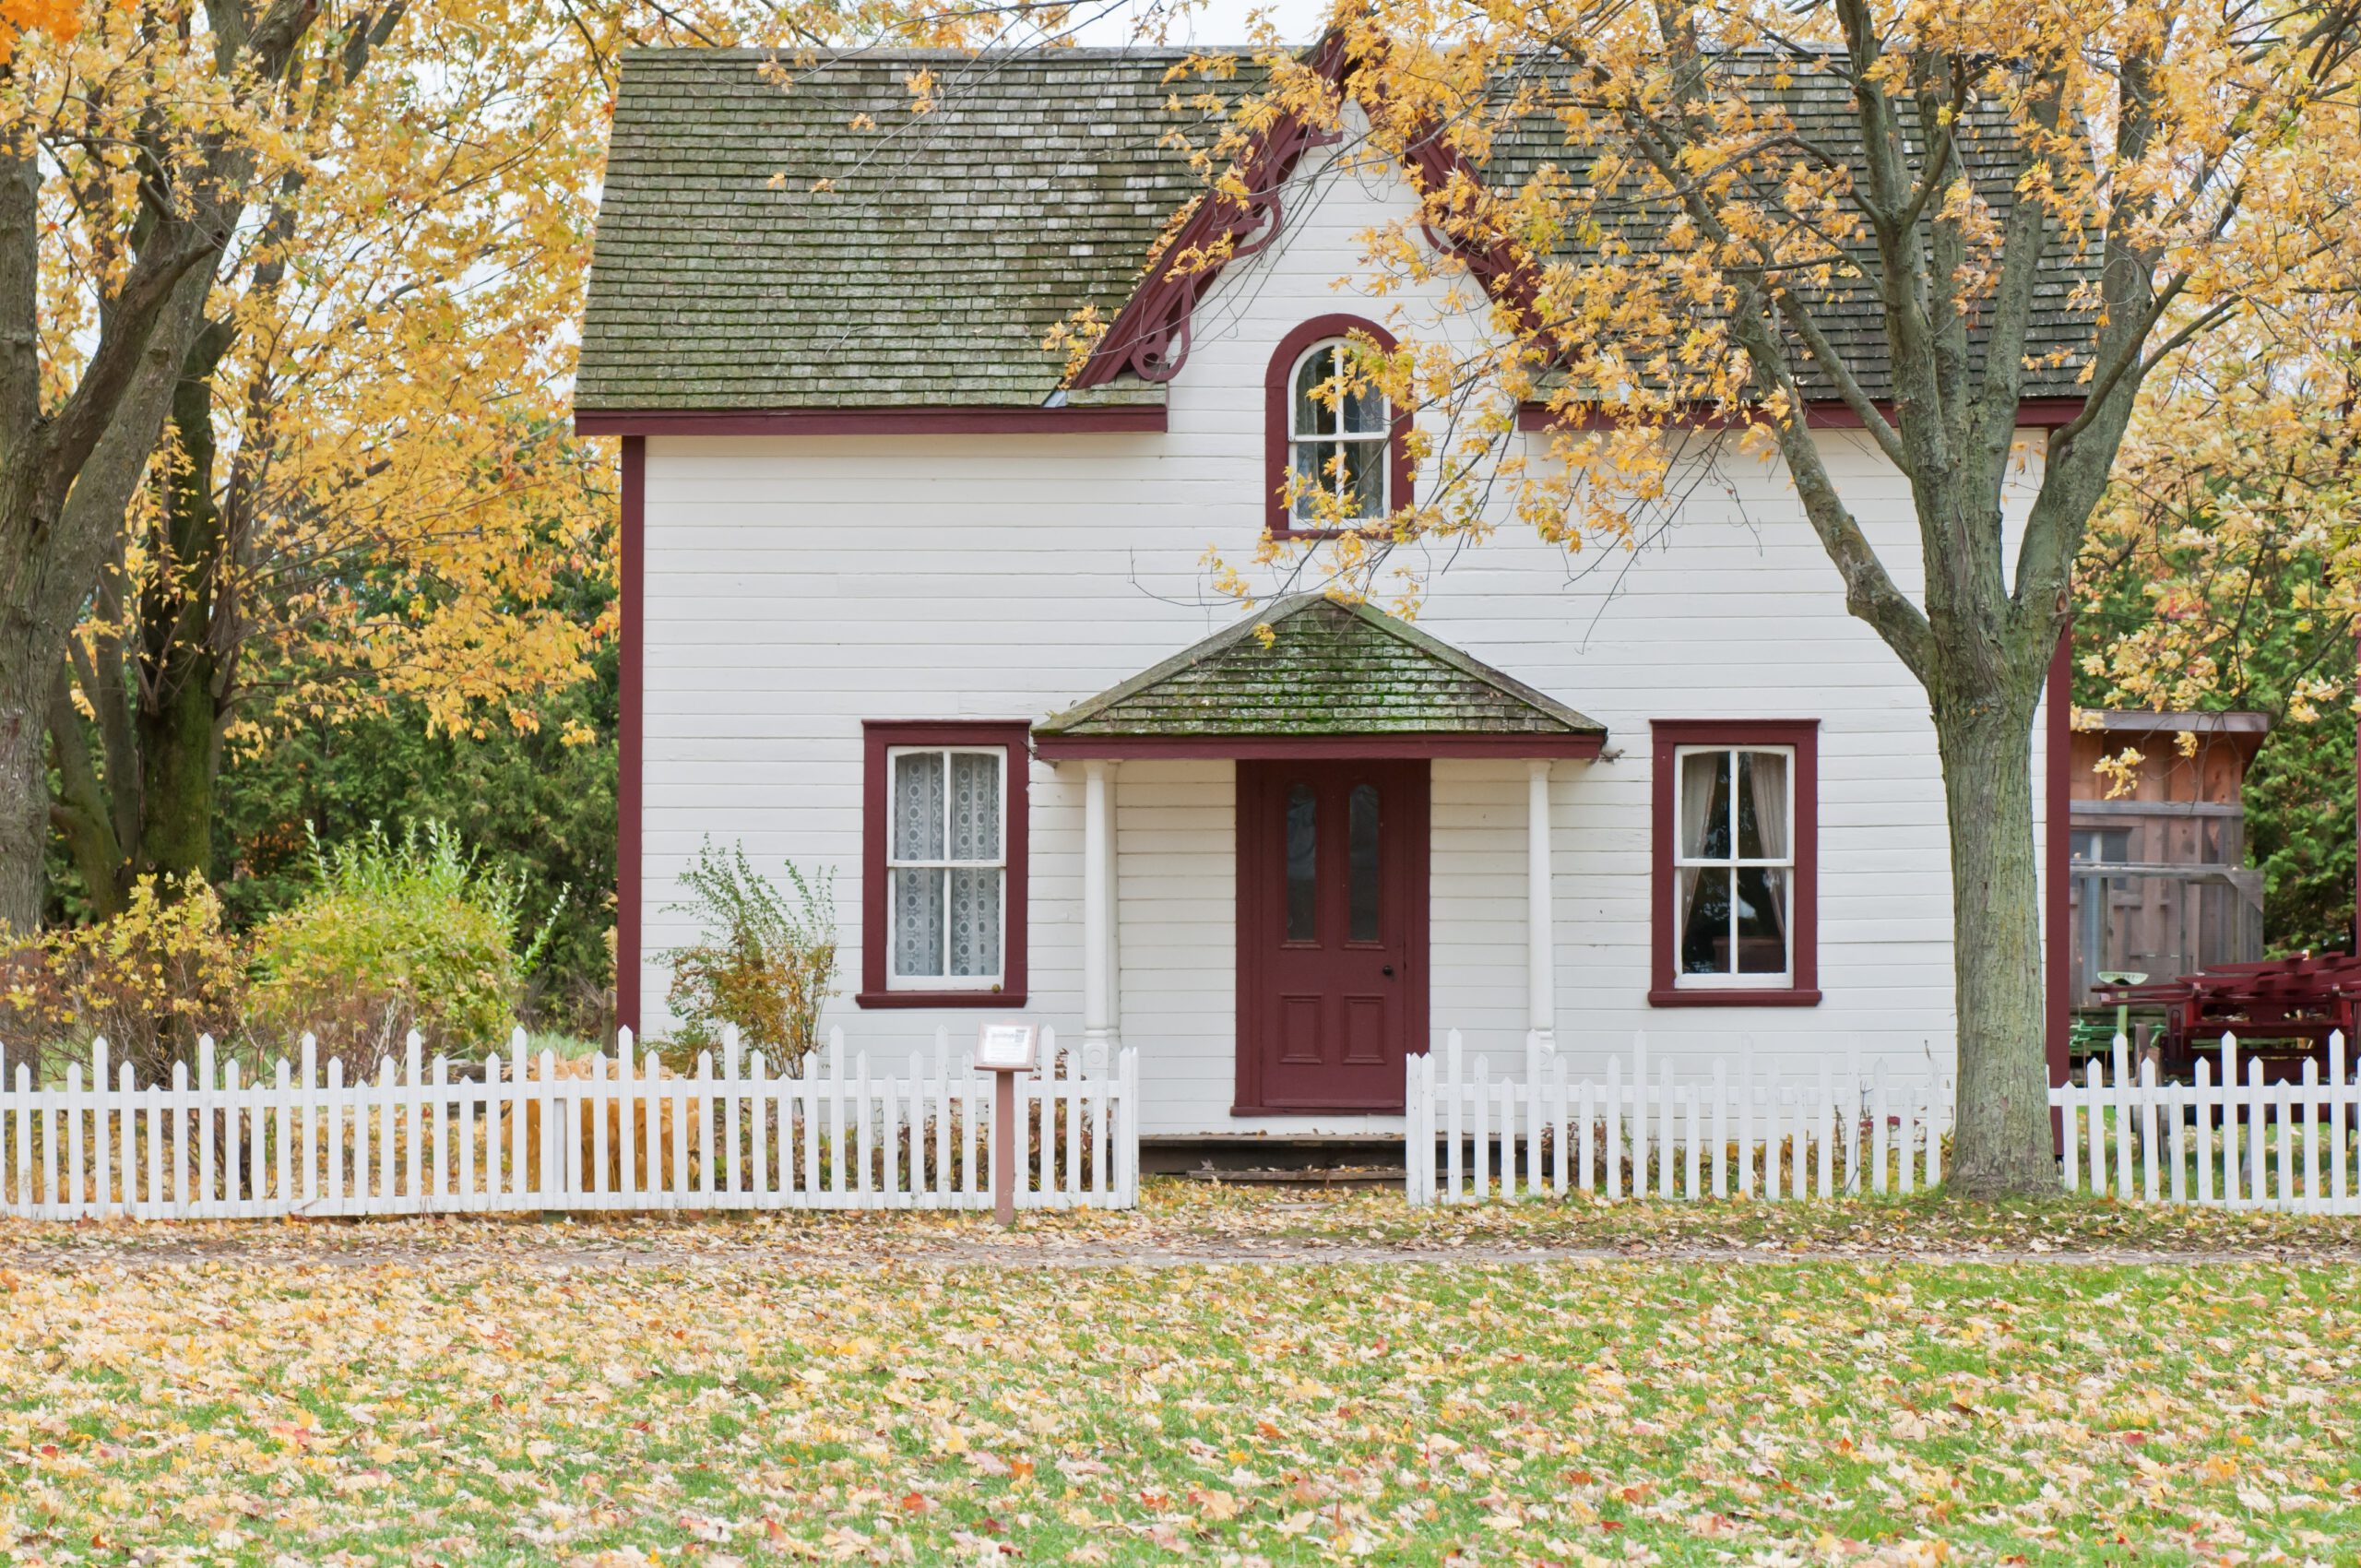 What to do when you want to buy your dream home?